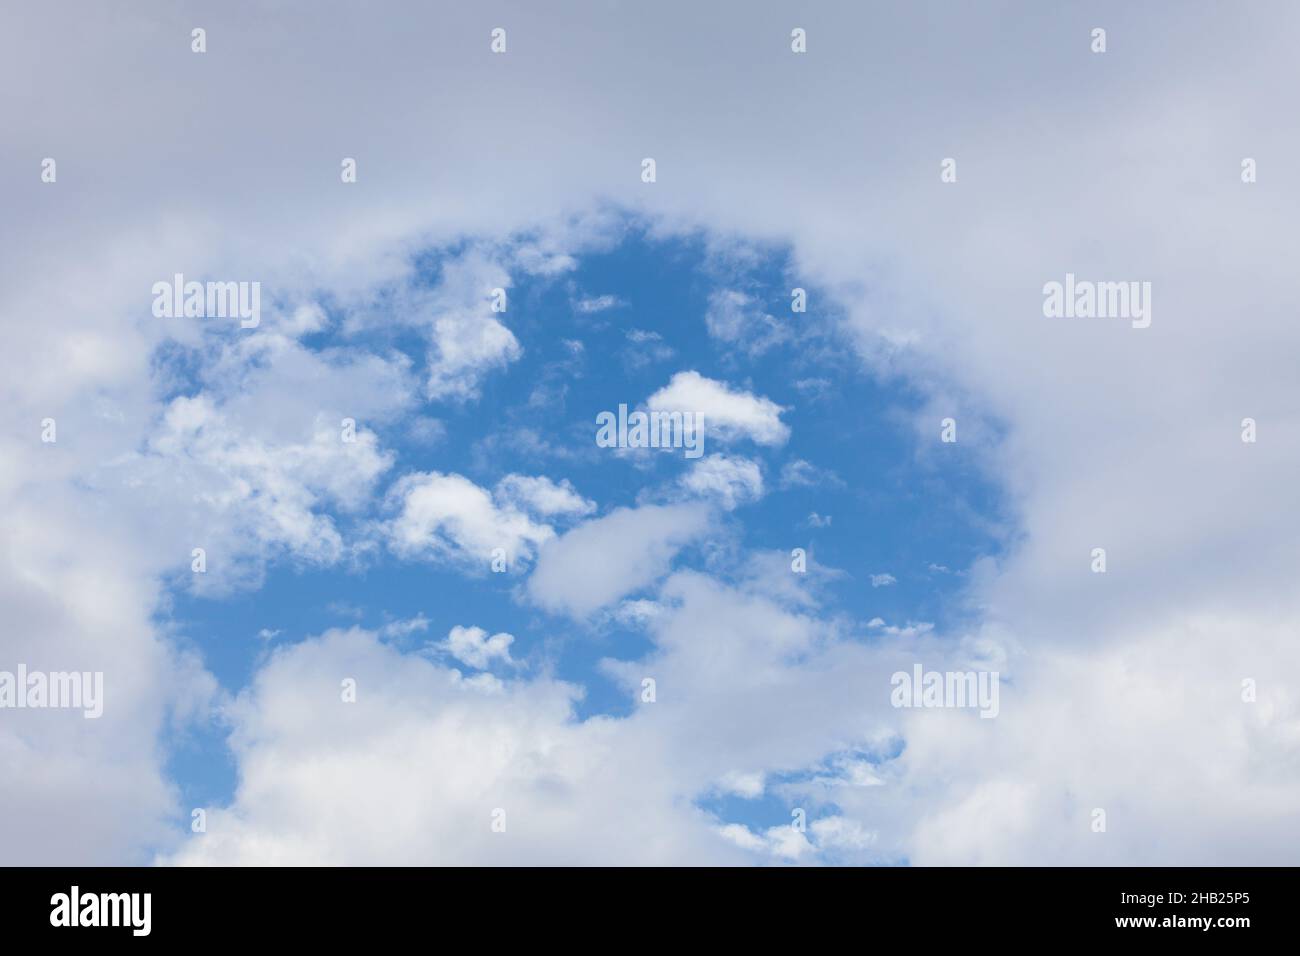 Sky, blue, clouds, out, mist, by, come, circle, symbol, lots, ground fog, resolve, weather, light blue, foggy, better, improvement, clear, clear up, c Stock Photo